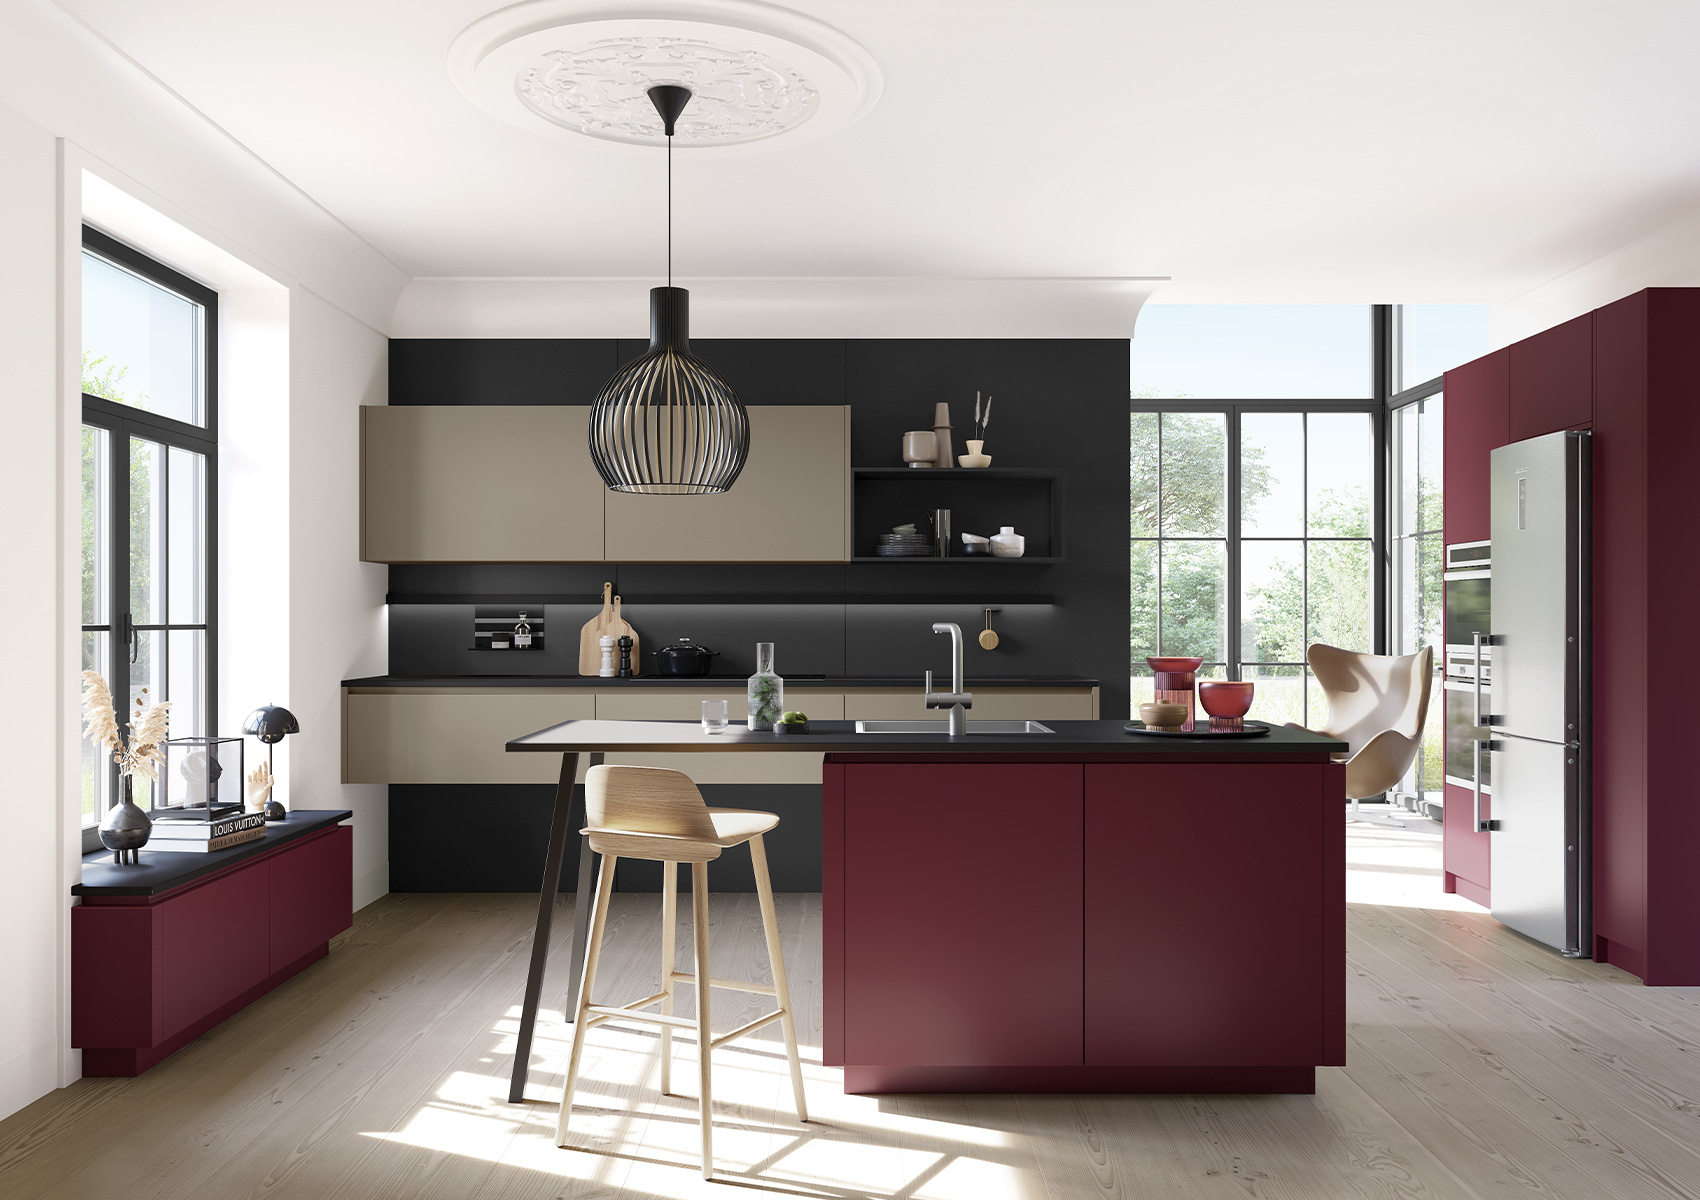 The kitchen in the Selection color burgundy in combination with umber nature